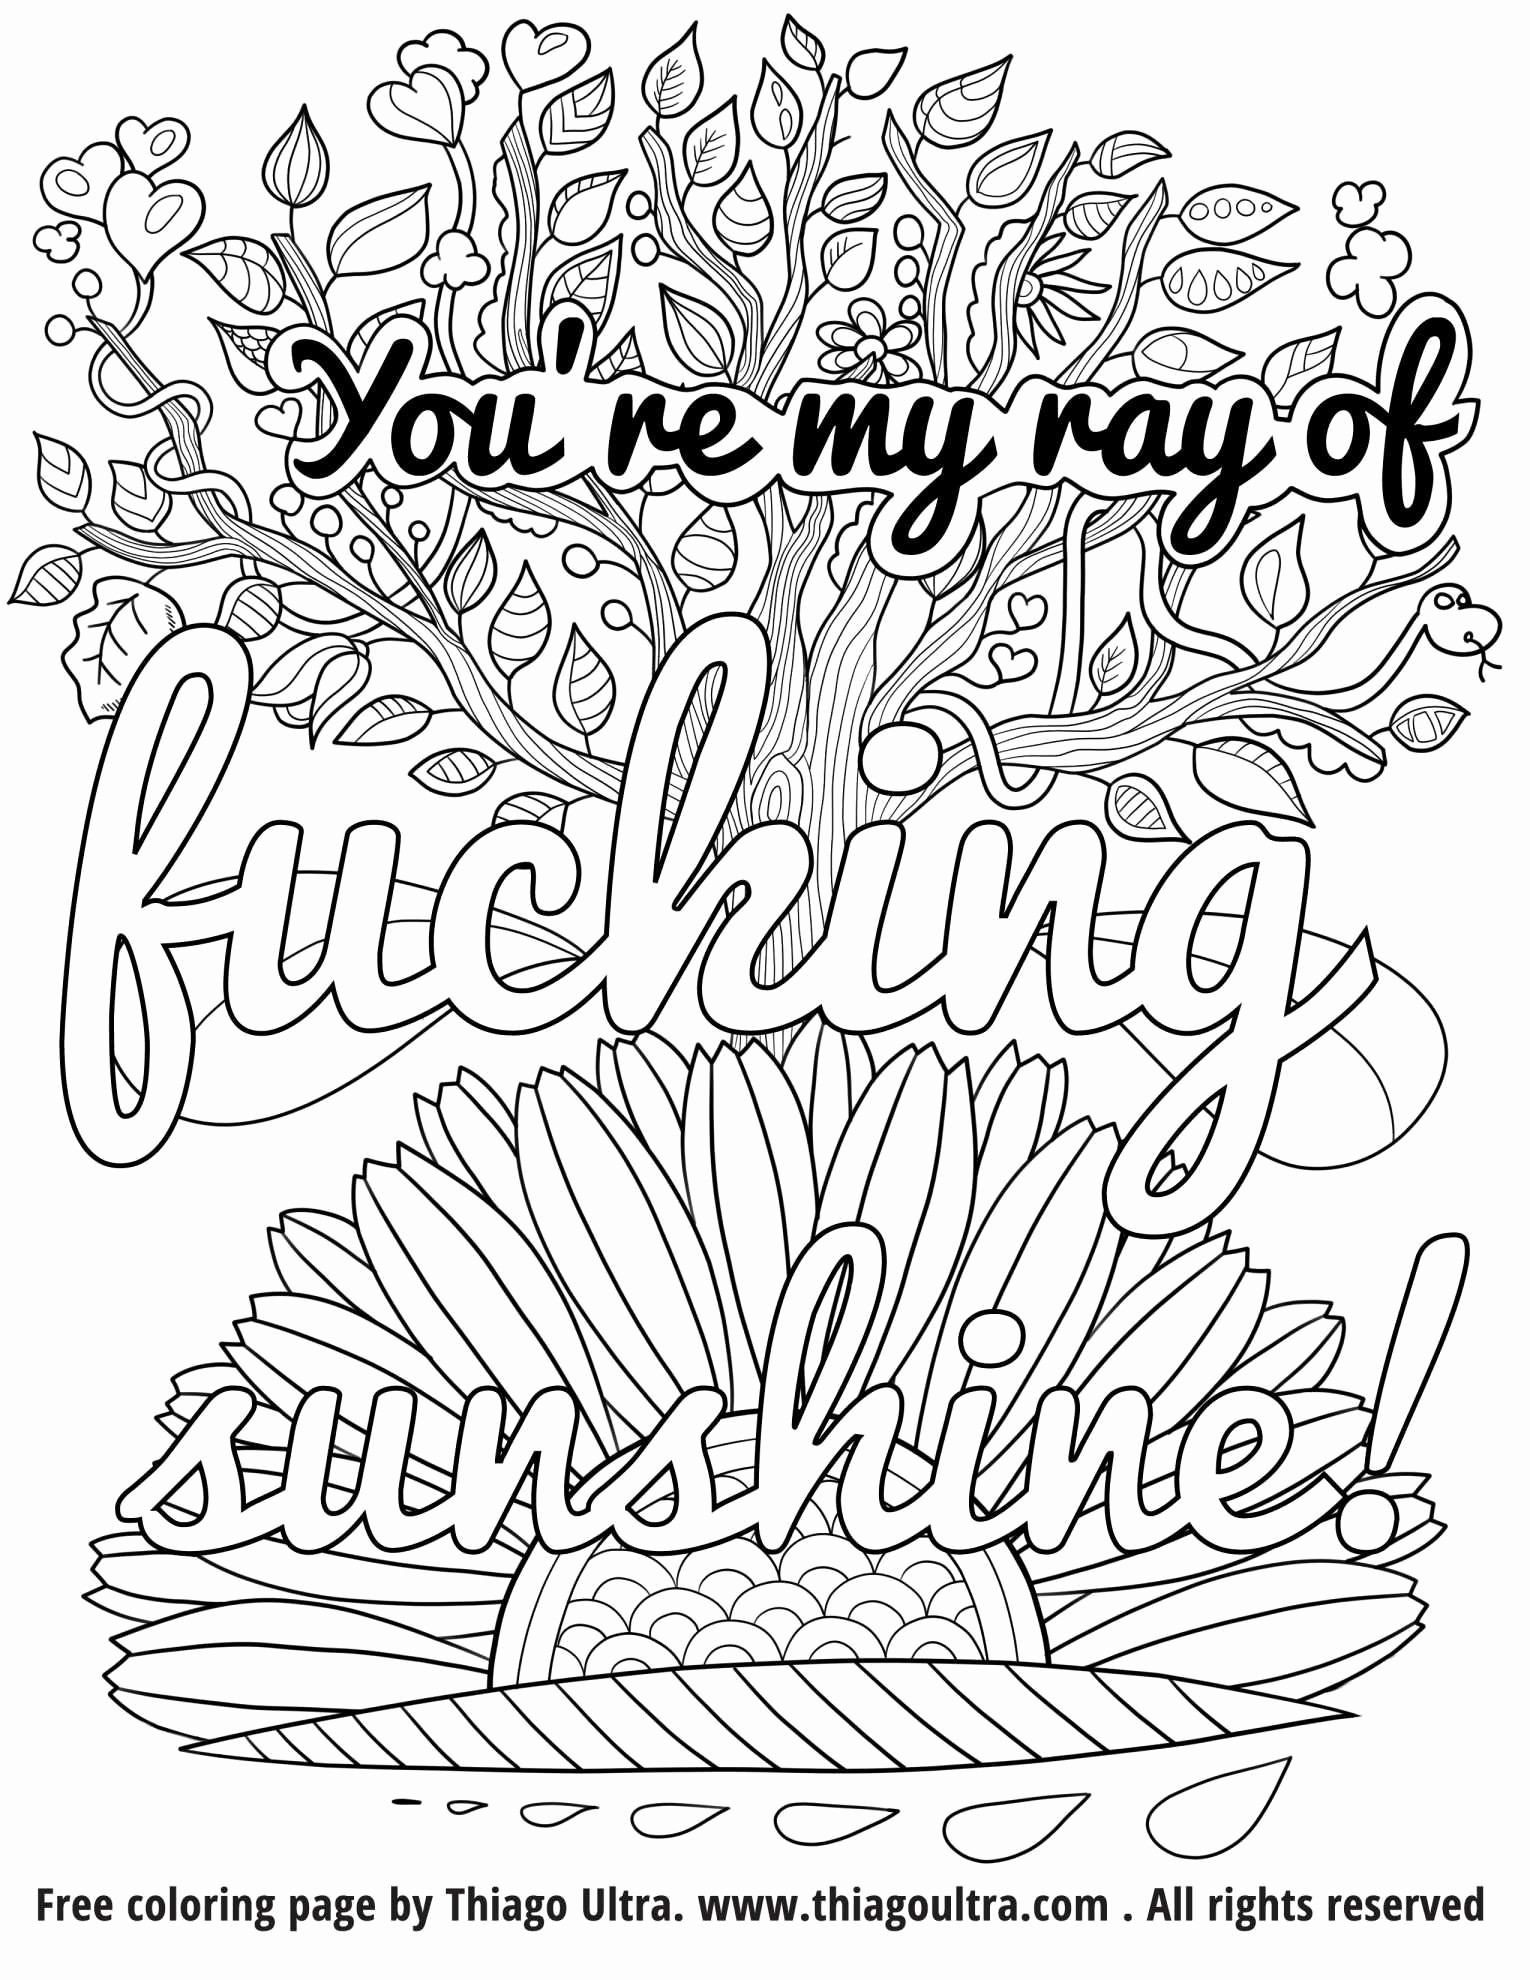 New Swear Word Coloring Book Album Imgur Hair Coloring Pages New Line Coloring 0d Archives